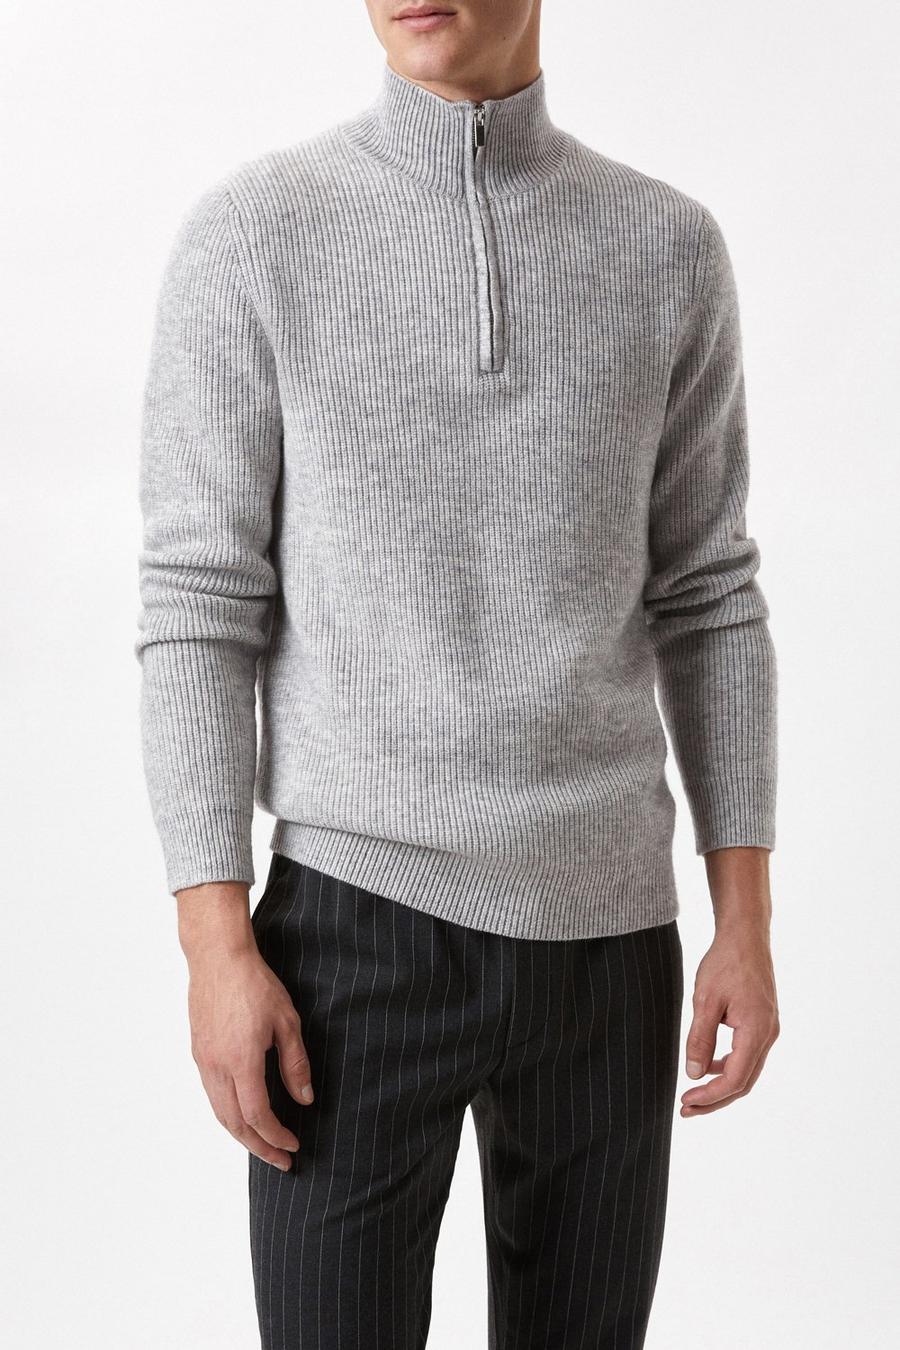 Super Soft Grey Rib Zip Knitted Funnel